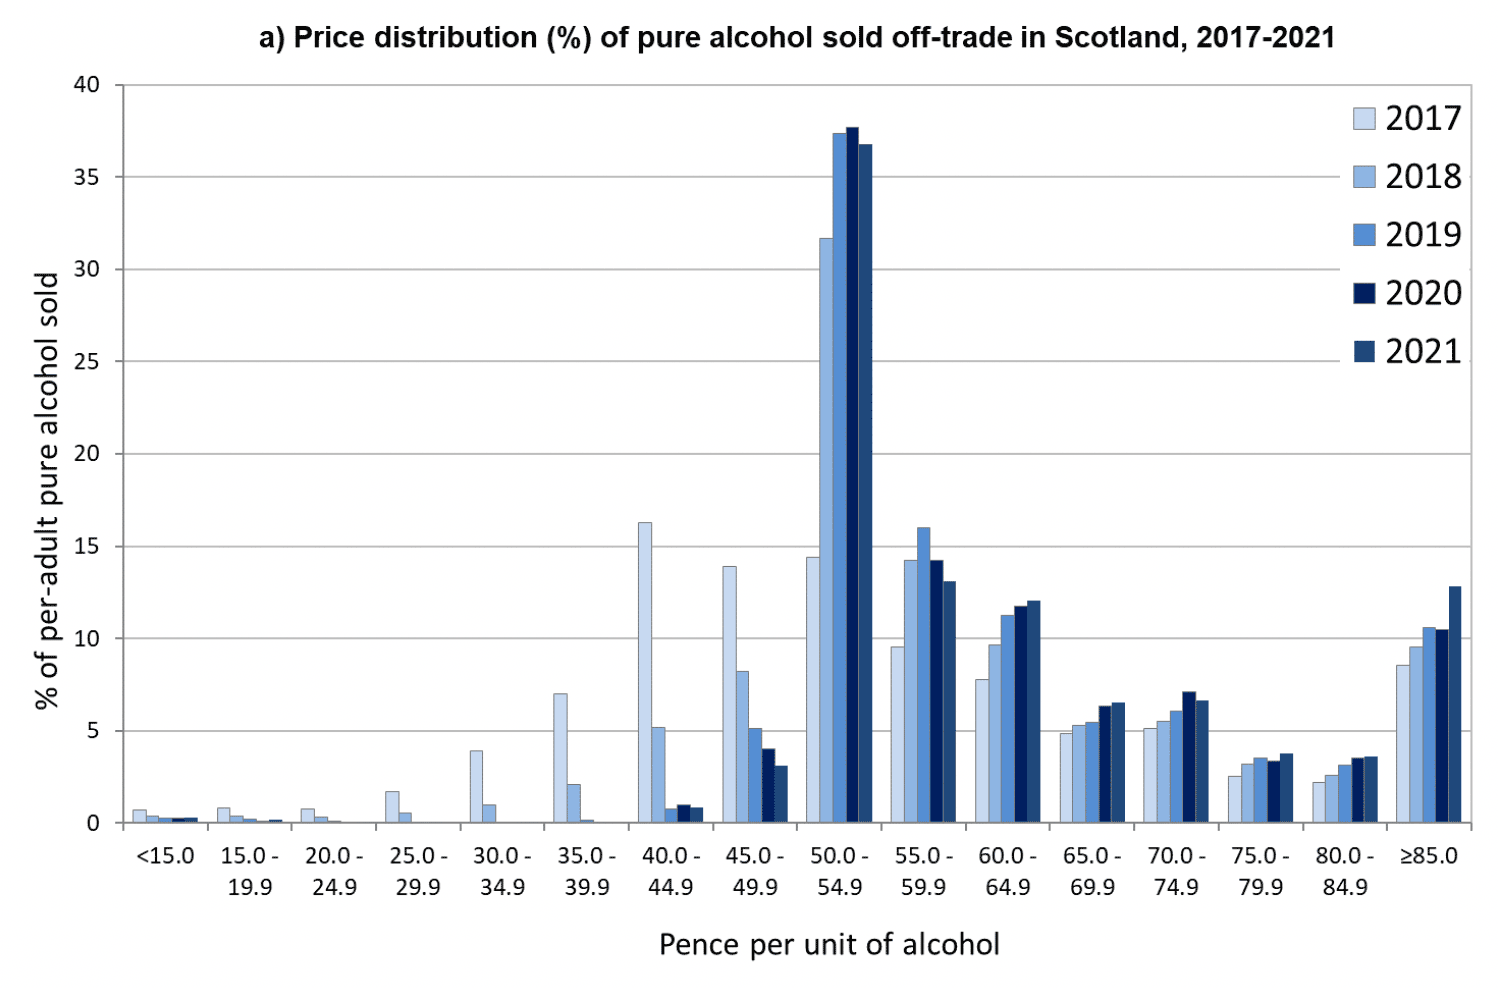 Shows the price distribution of alcohol sales (by volume) in the Scottish off-trade from 2017, prior to MUPs introduction, to 2021. It shows how the price distribution changed following the introduction of MUP, with a large shift in the share of products which had been below 50ppu in 2017 shifting to above that price point, making a large concentration of sales around that point.